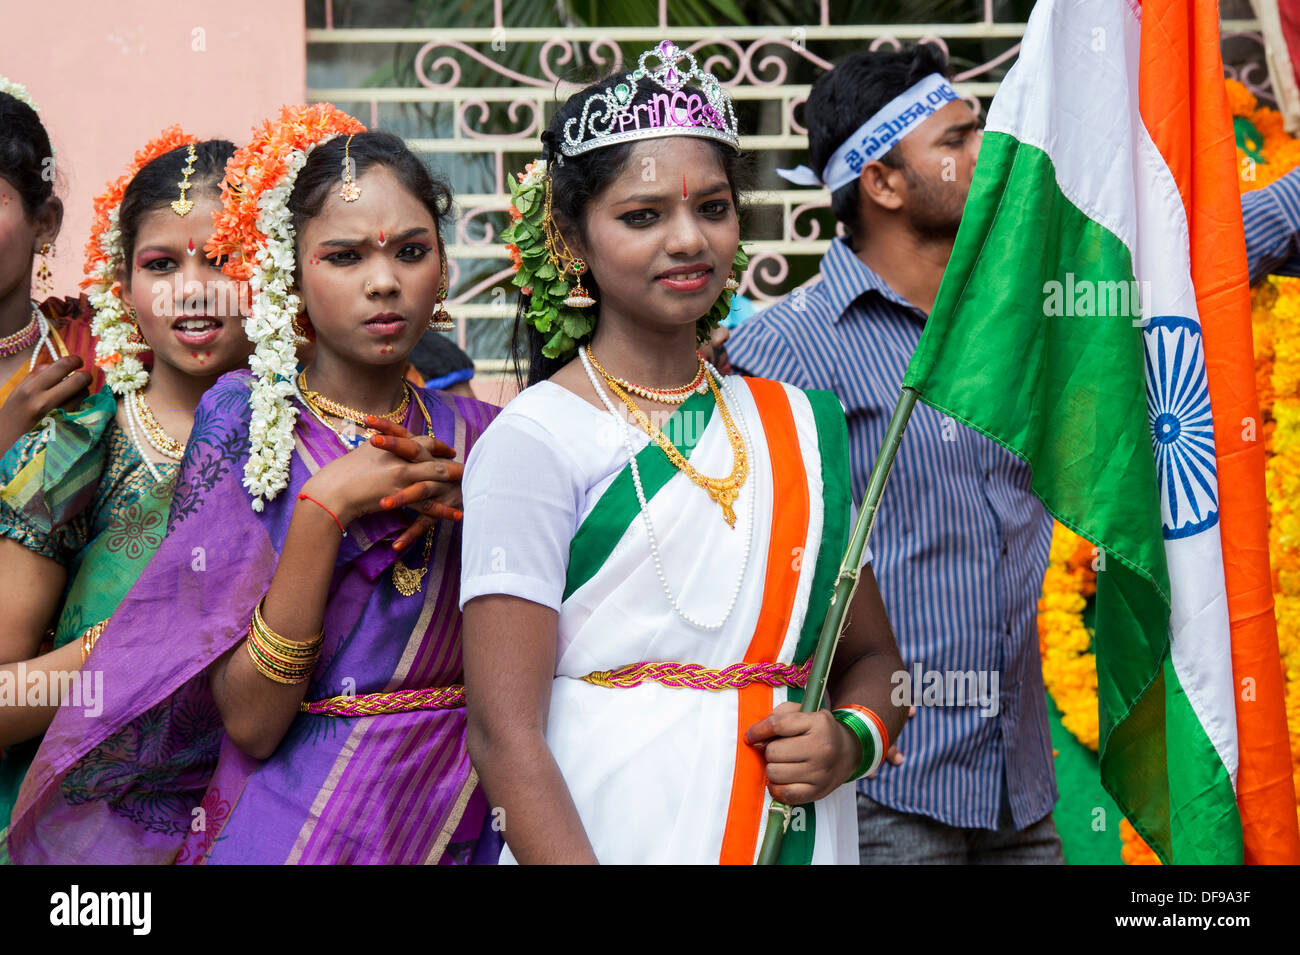 Indian girls dressed in traditional costumes at a protest rally. Puttaparthi, Andhra Pradesh, India Stock Photo